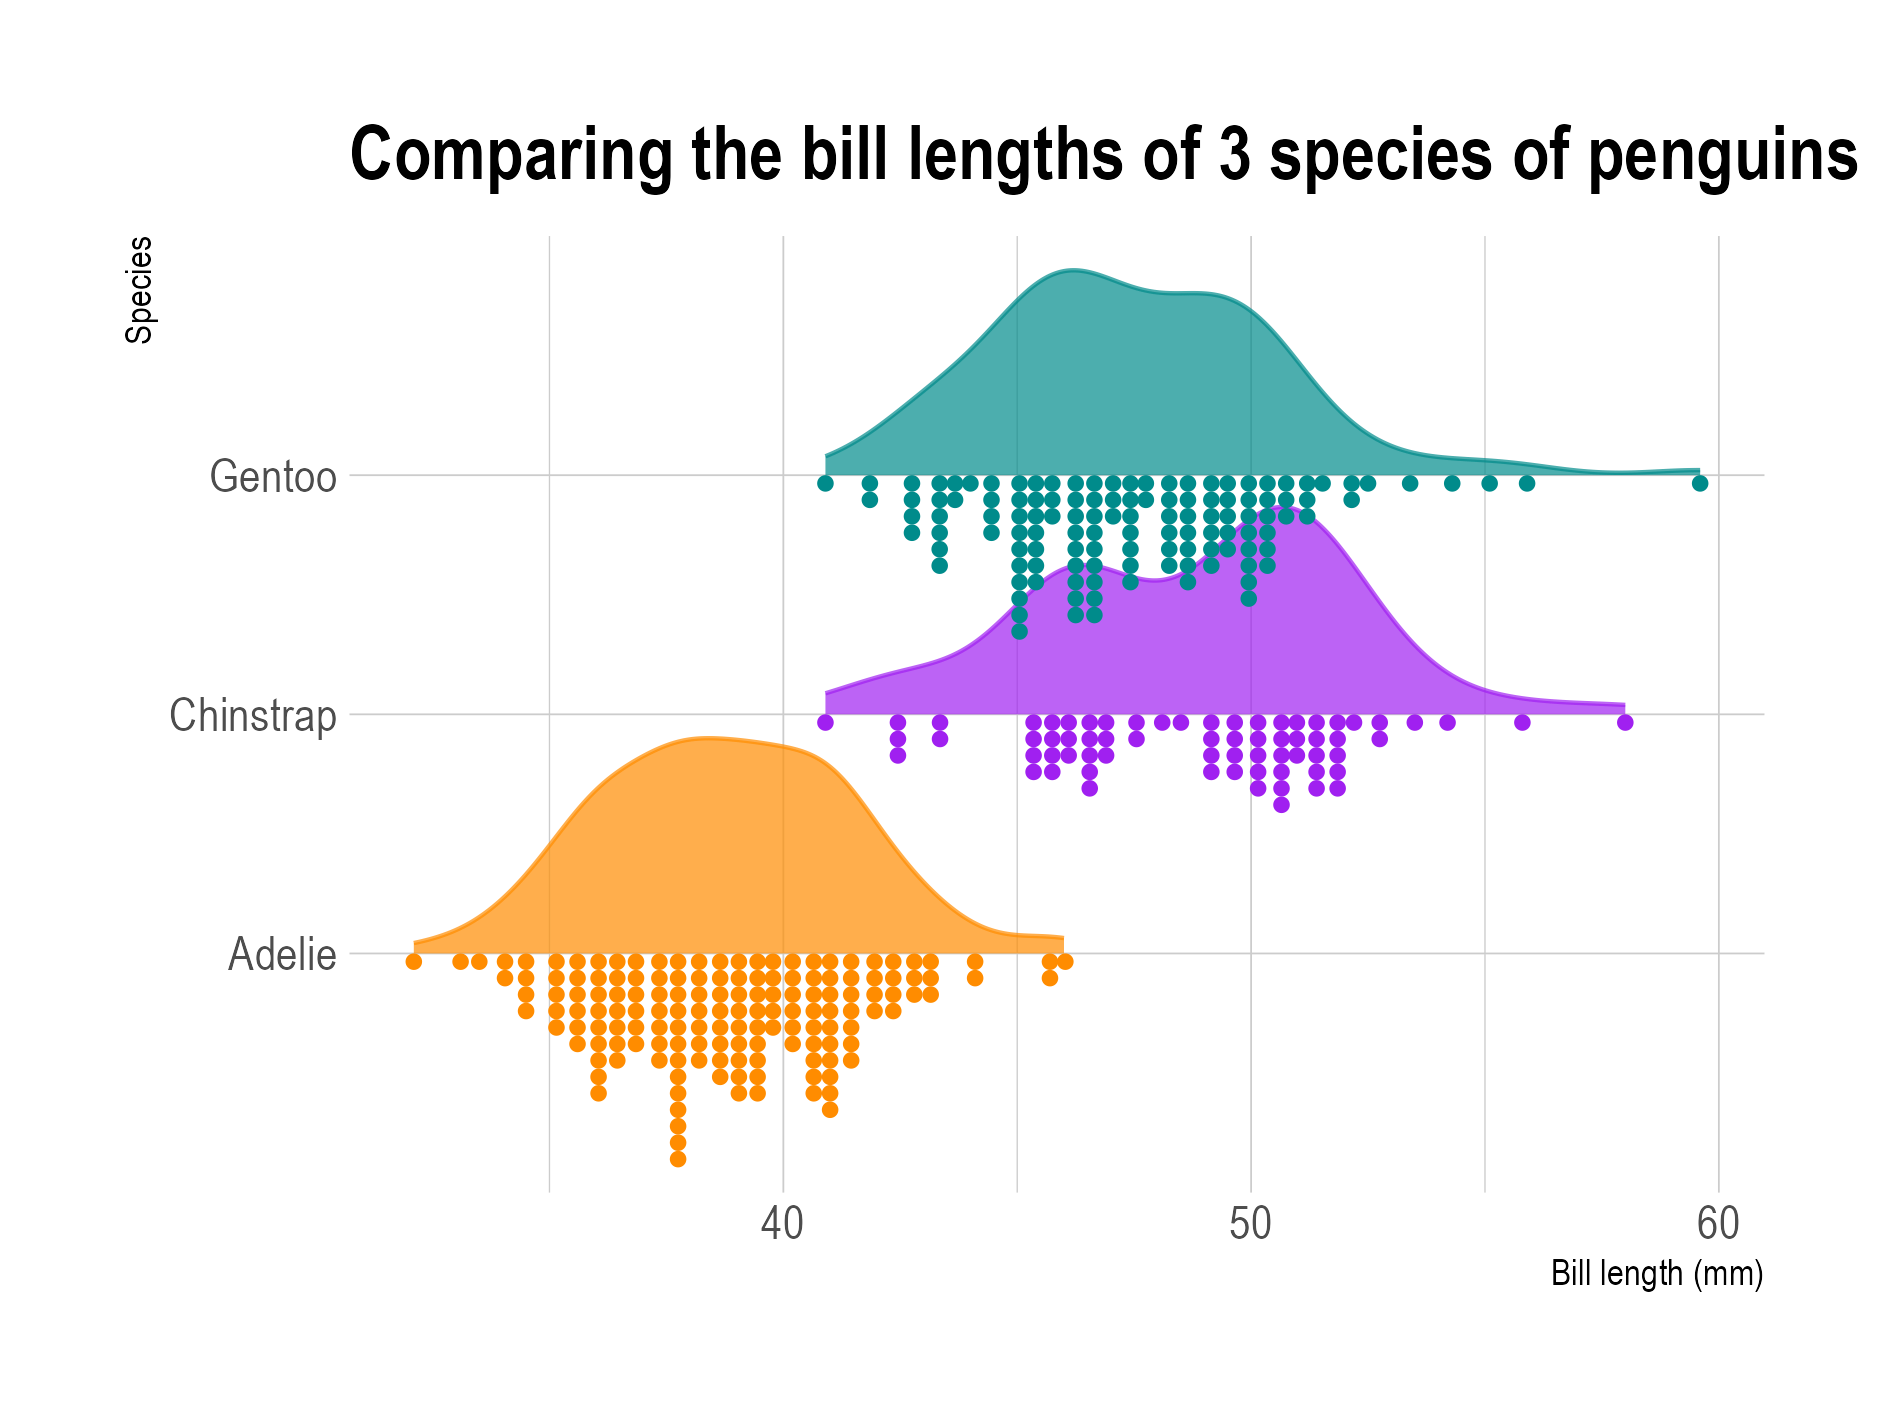 Three raincloud plots showing the distribution of the bill length of 3 species of penguins